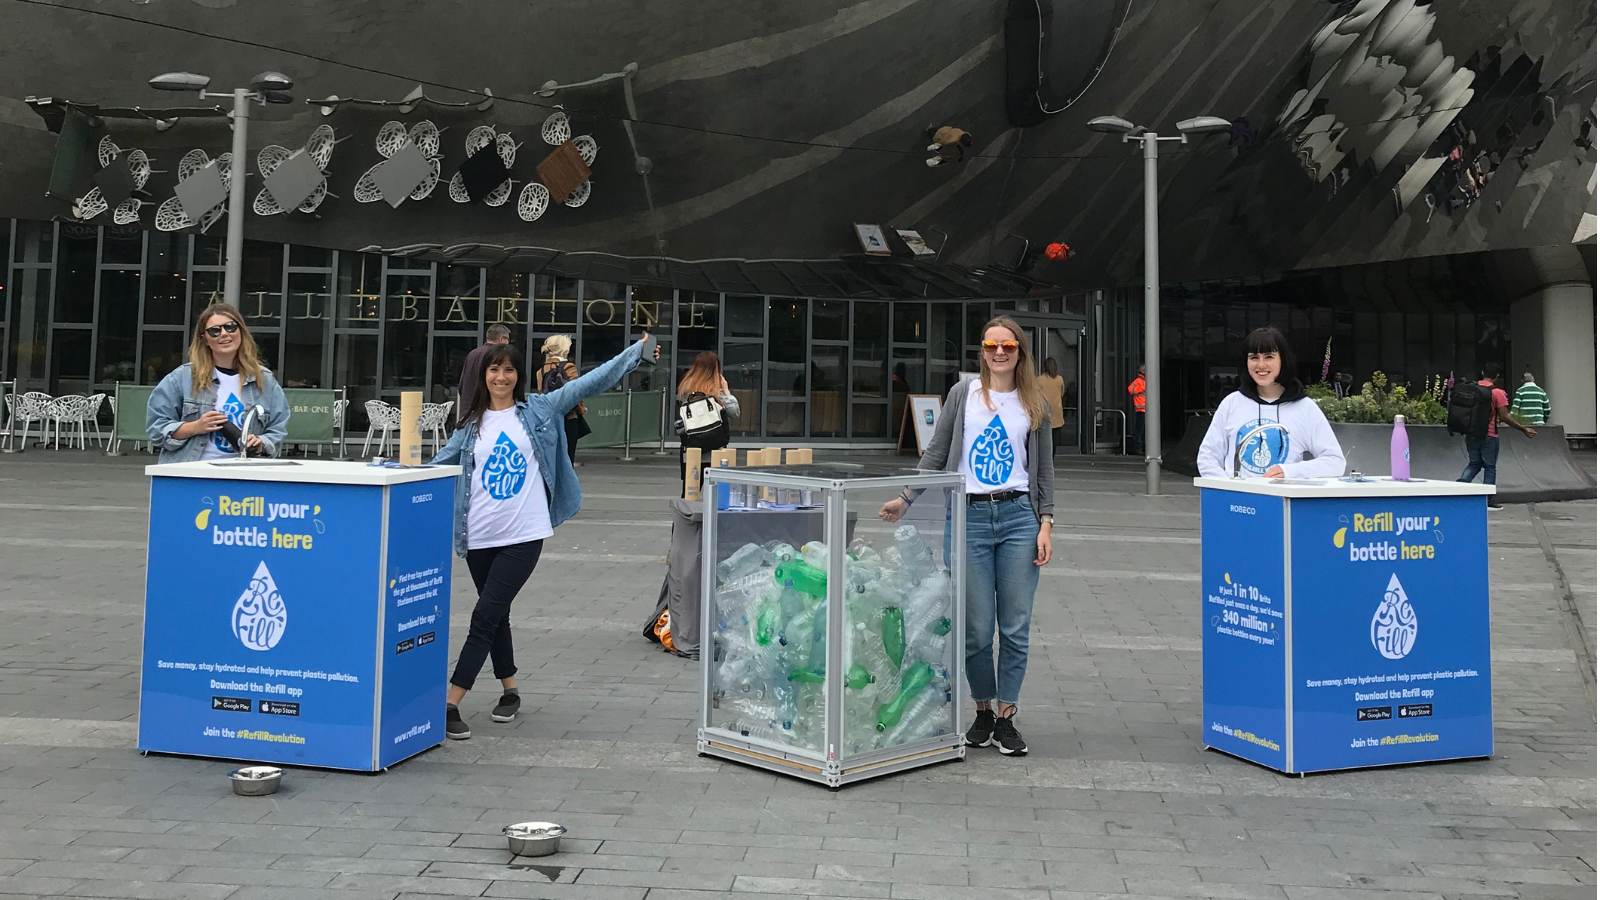 Campaigners promote the water refill initiative at Birmingham's New Street Station ©City to Sea